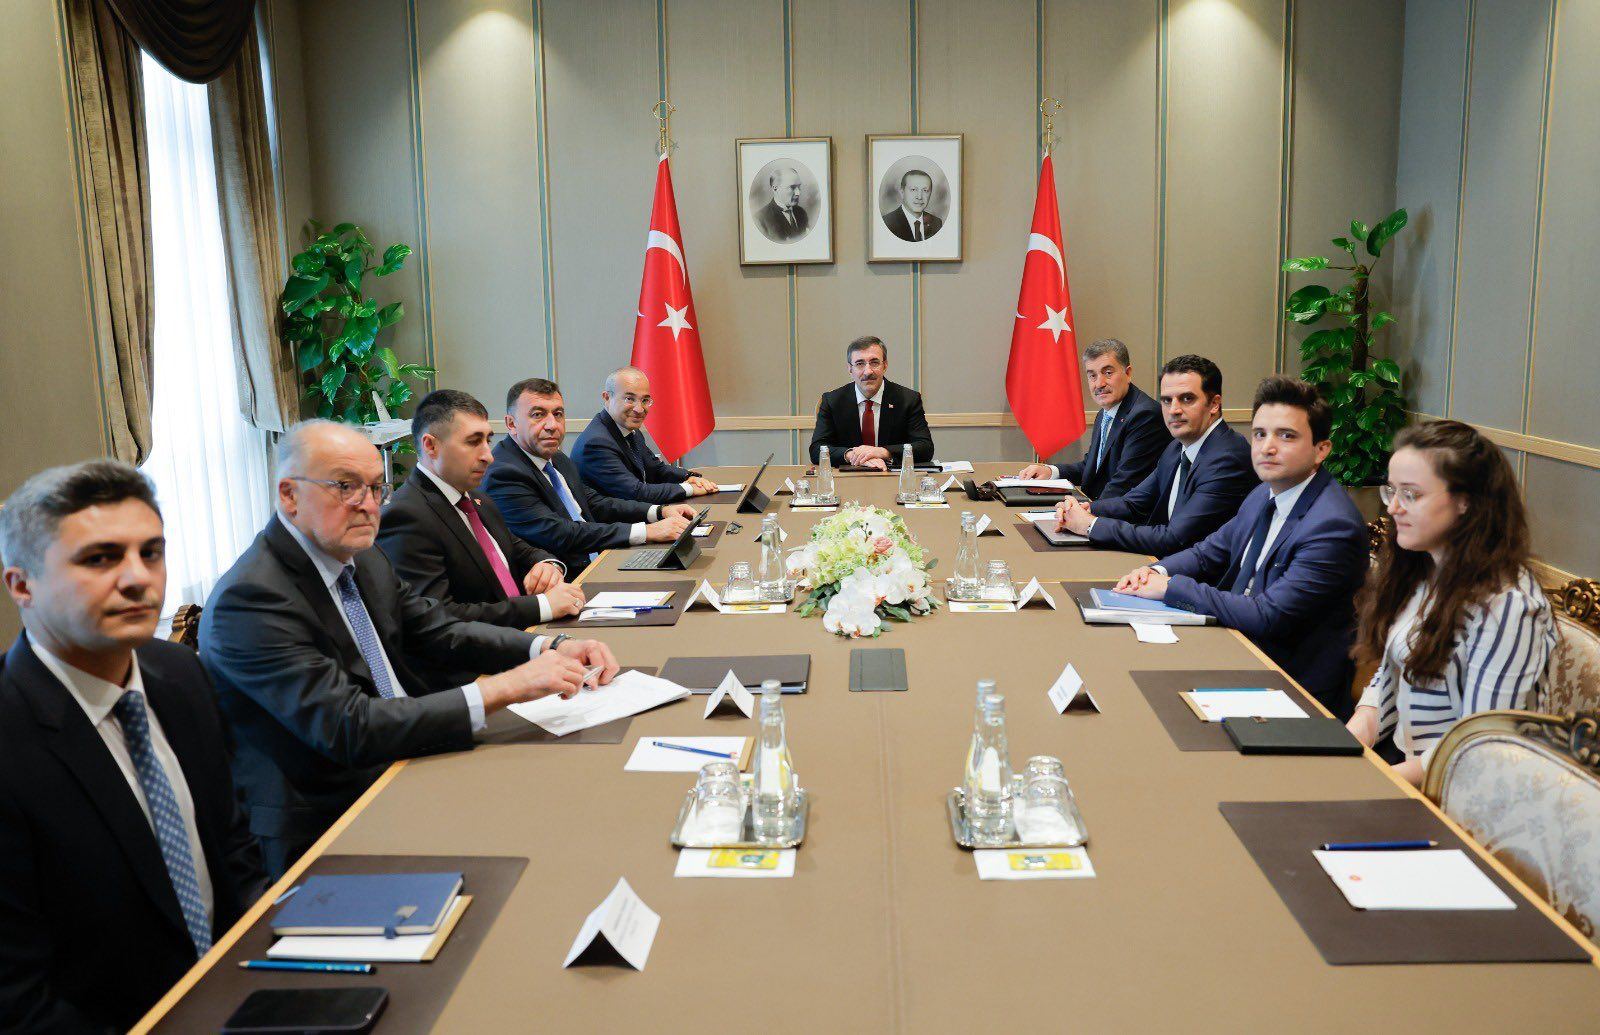 Türkiye to continue to develop cooperation with Azerbaijan in all areas - VP